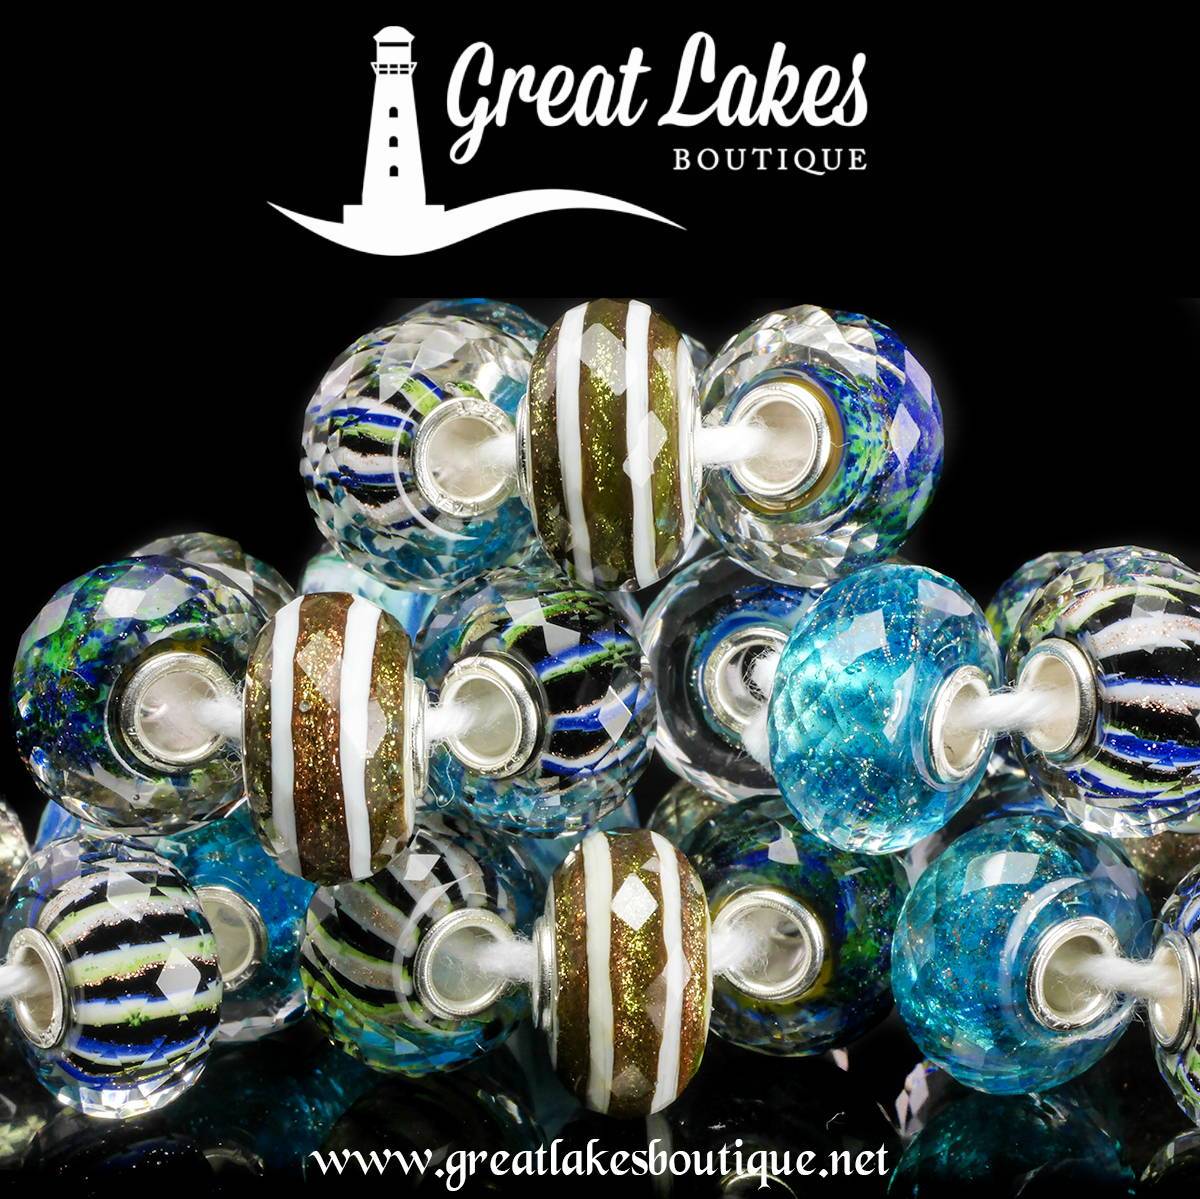 Trollbeads Spring 2021 - Great Lakes Boutique